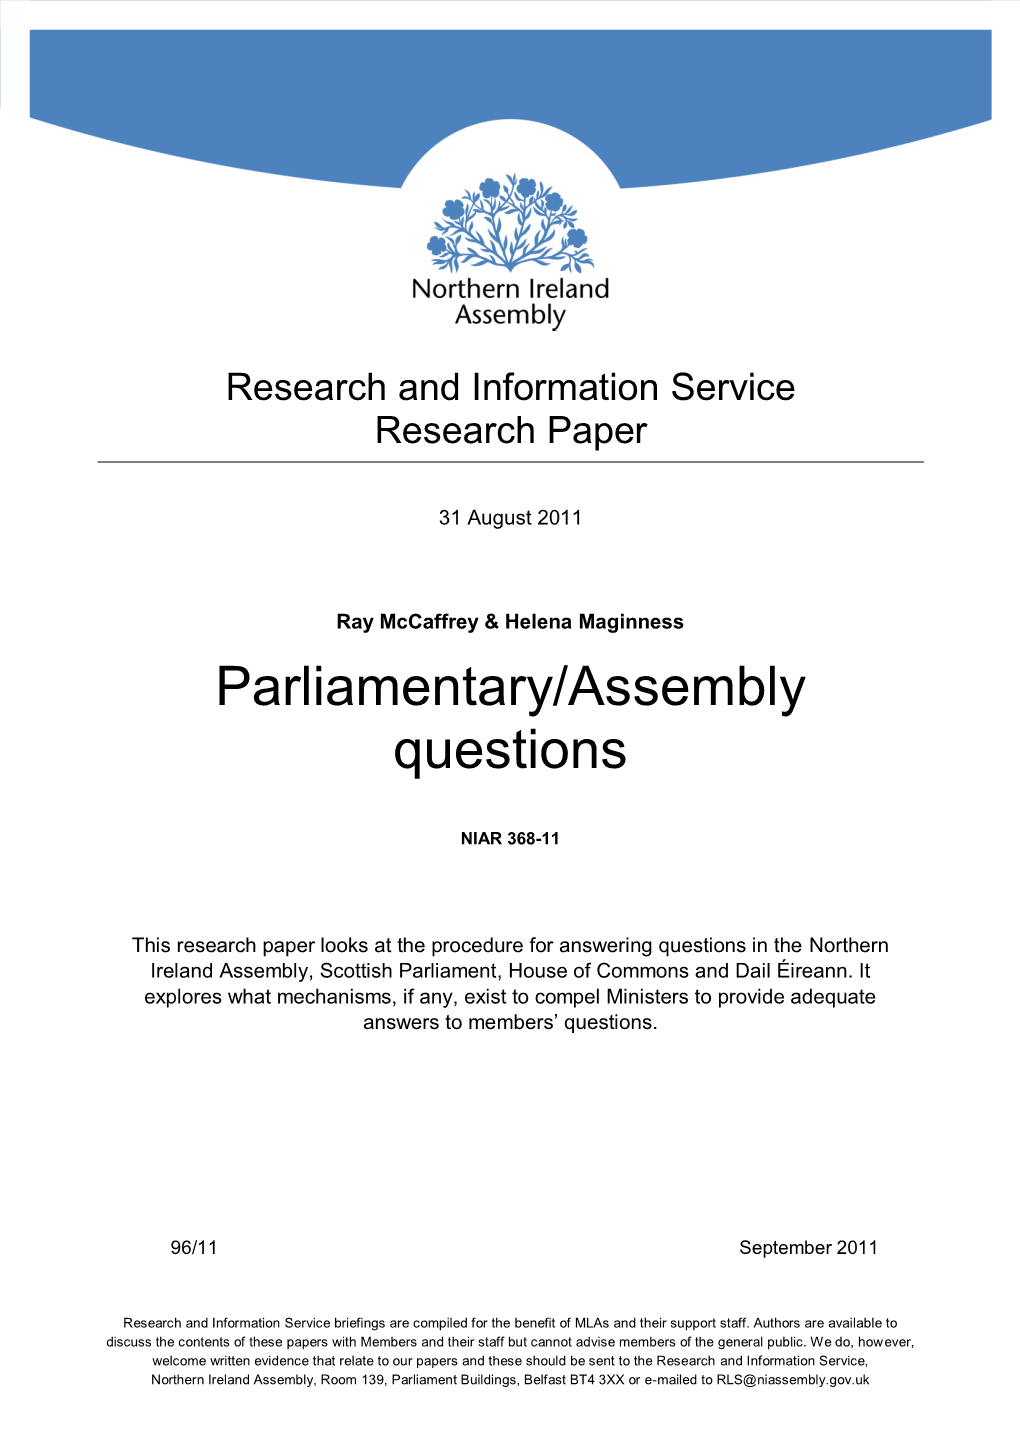 Parliamentary/Assembly Questions